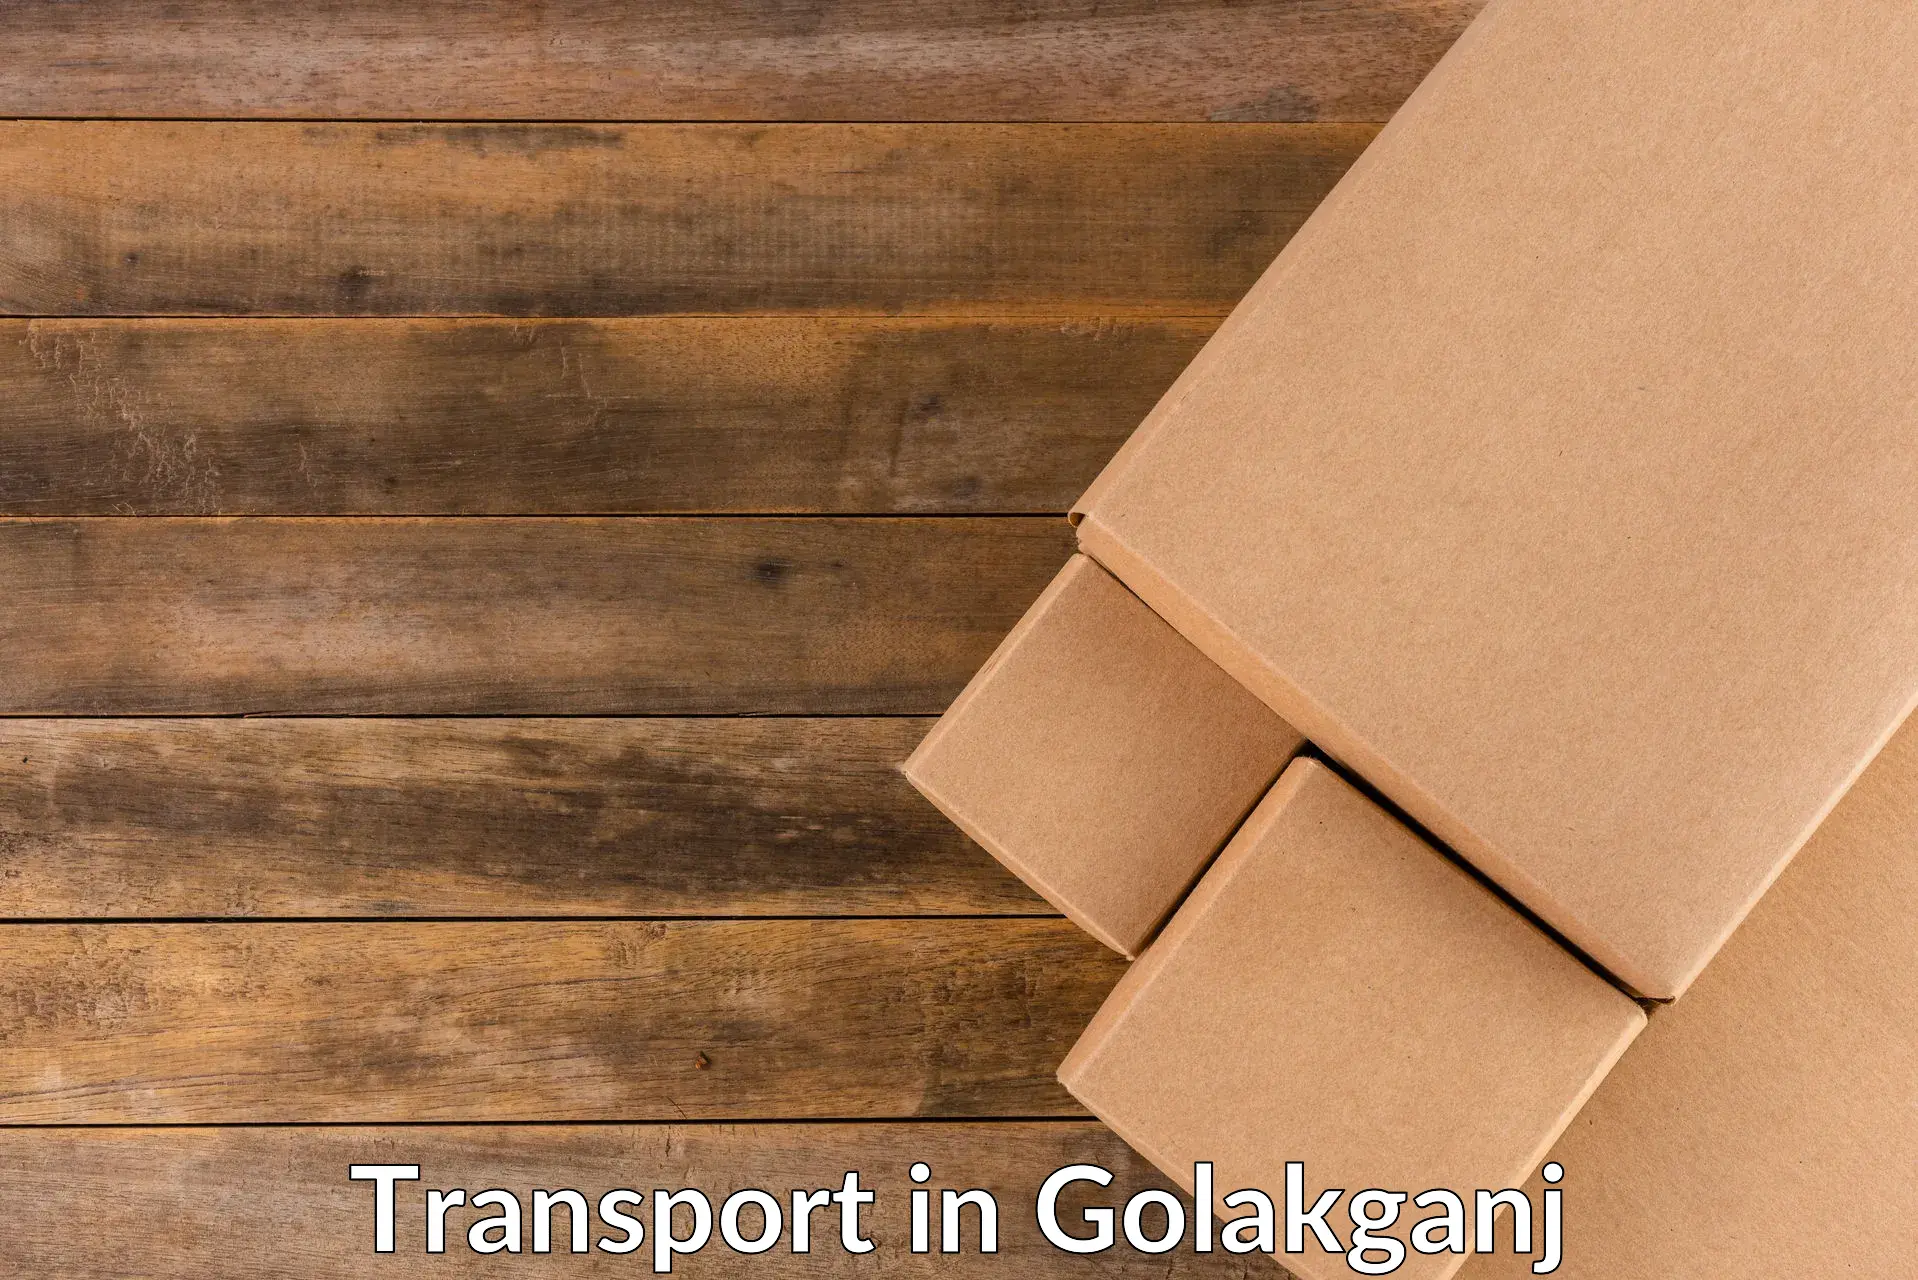 Transport bike from one state to another in Golakganj